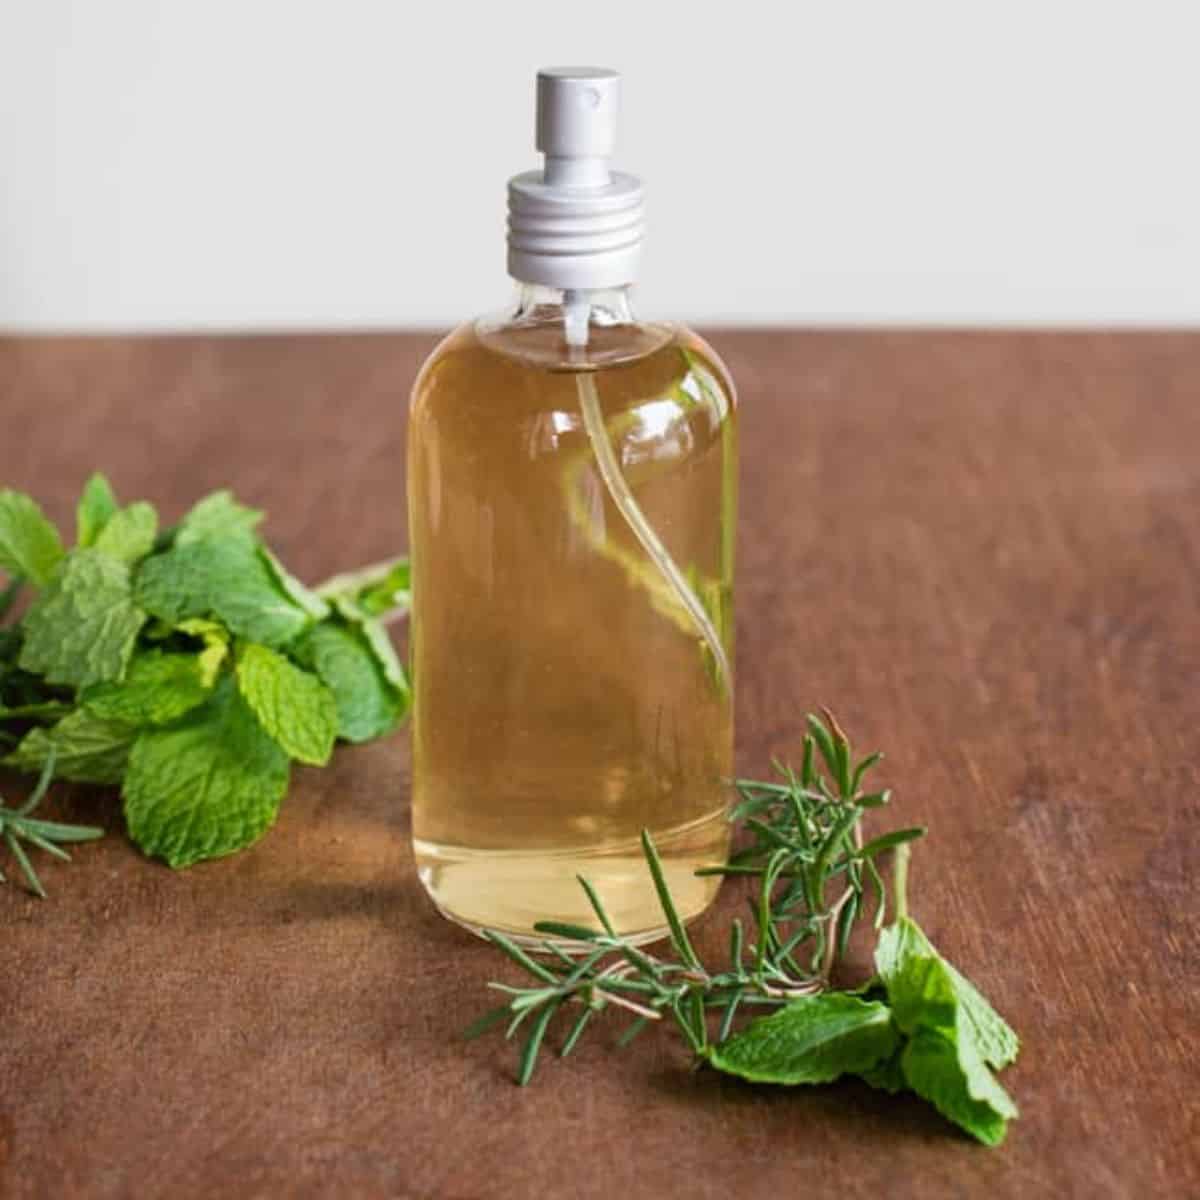 How To Choose the Right Essential Oils For Your Hair – Heliotrope